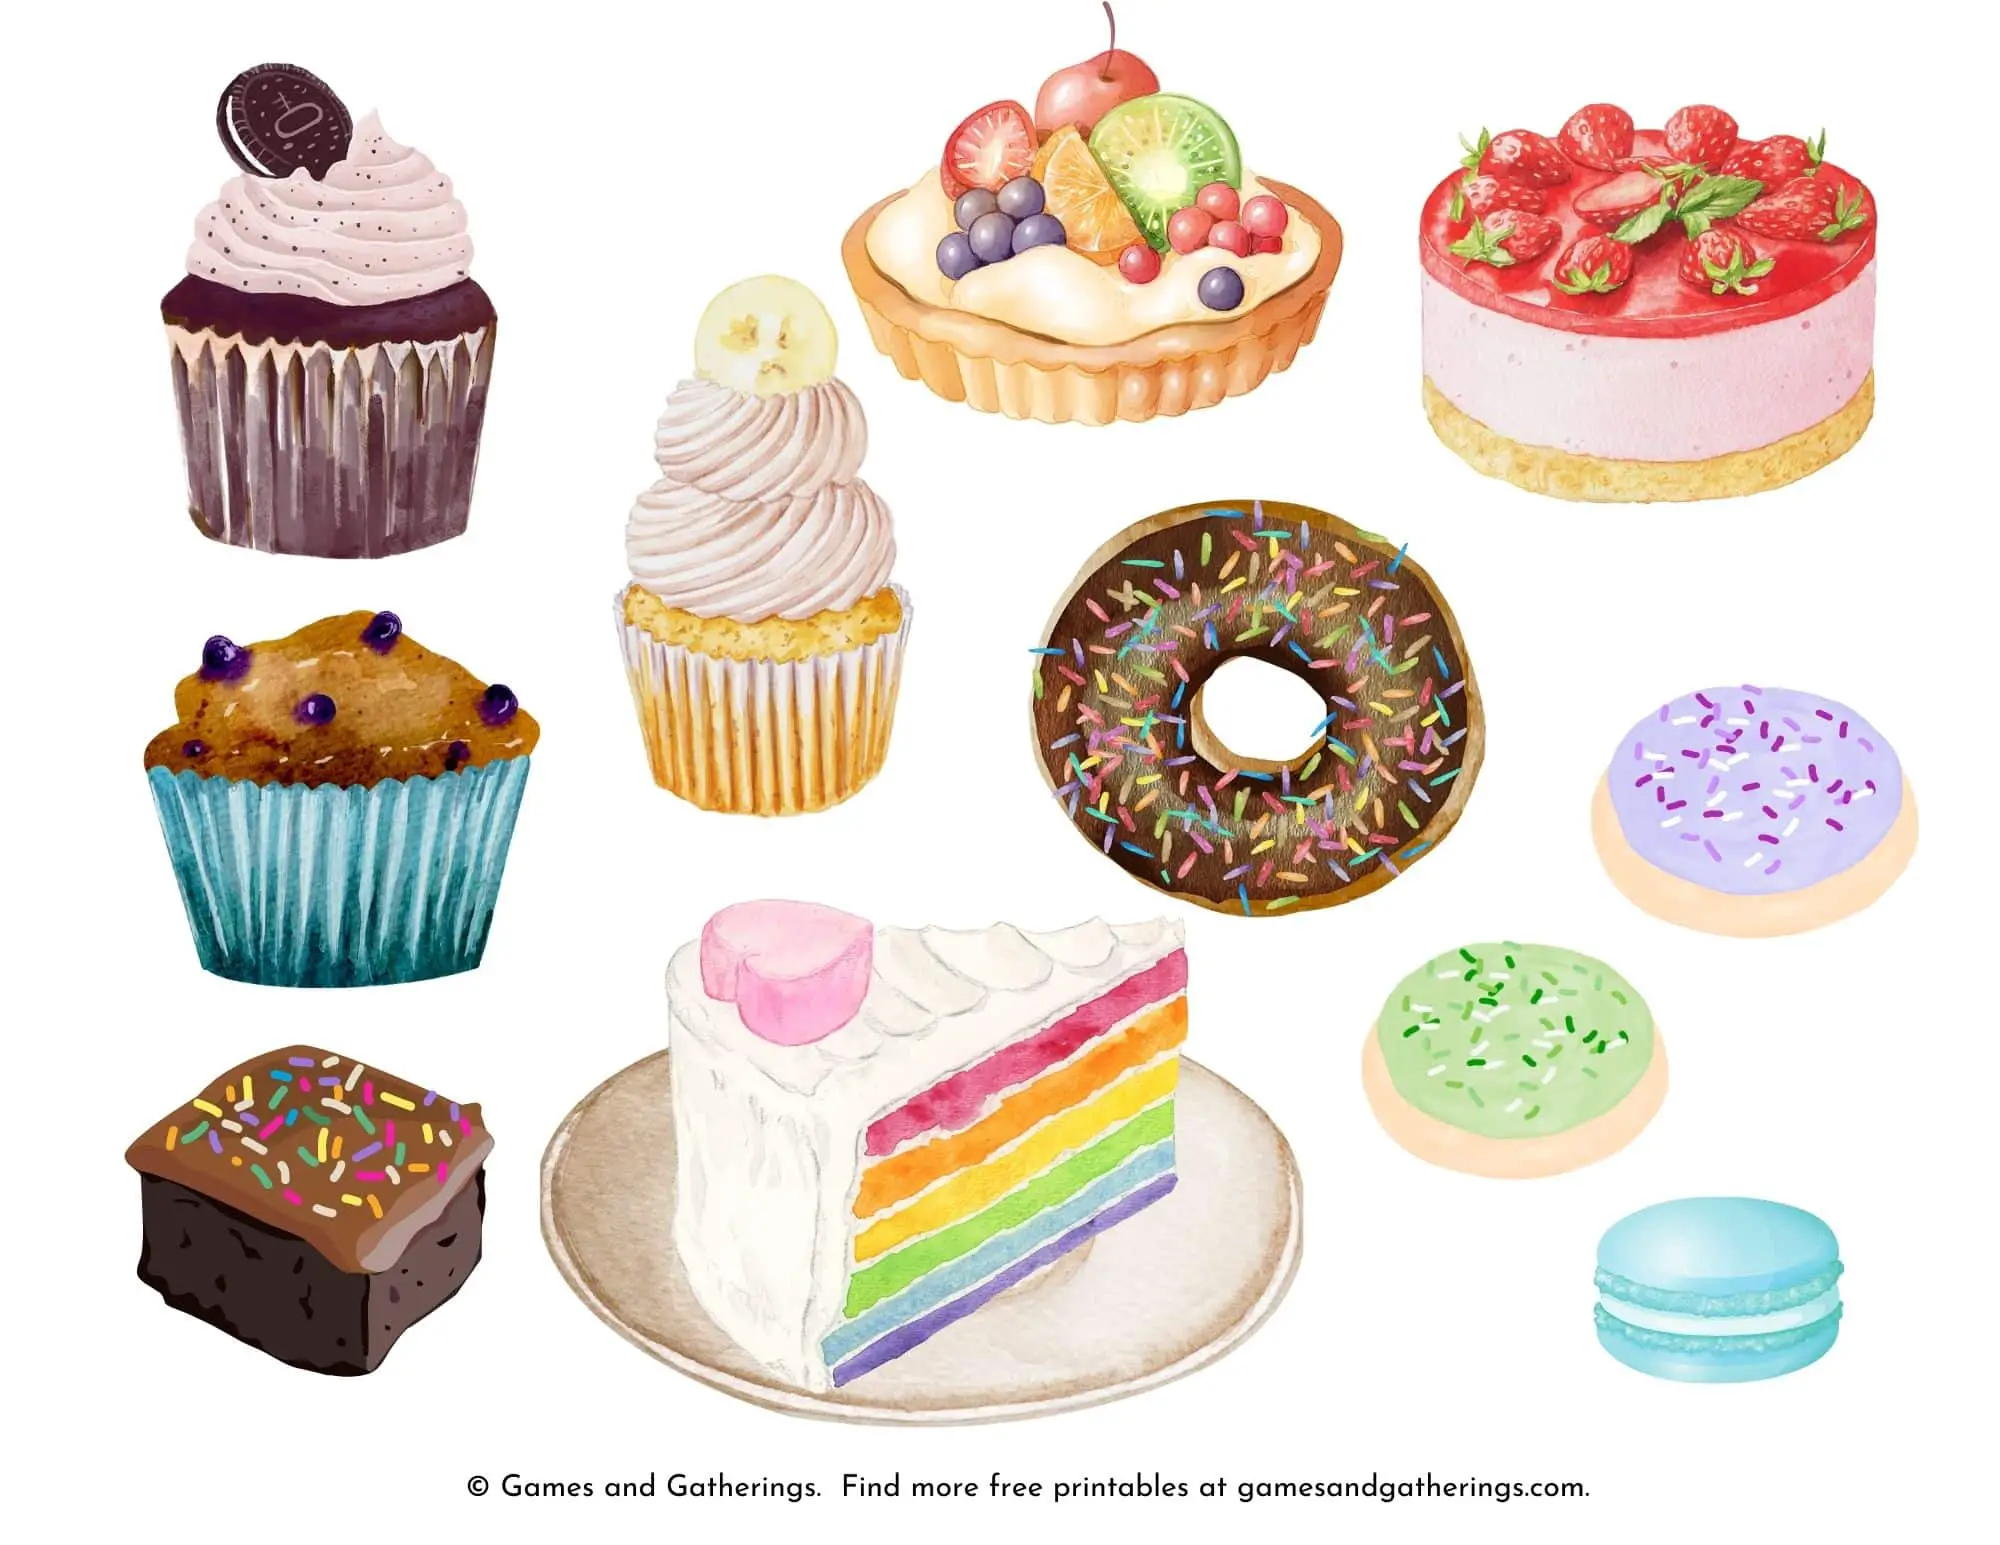 A page of printable pretend bakery desserts.